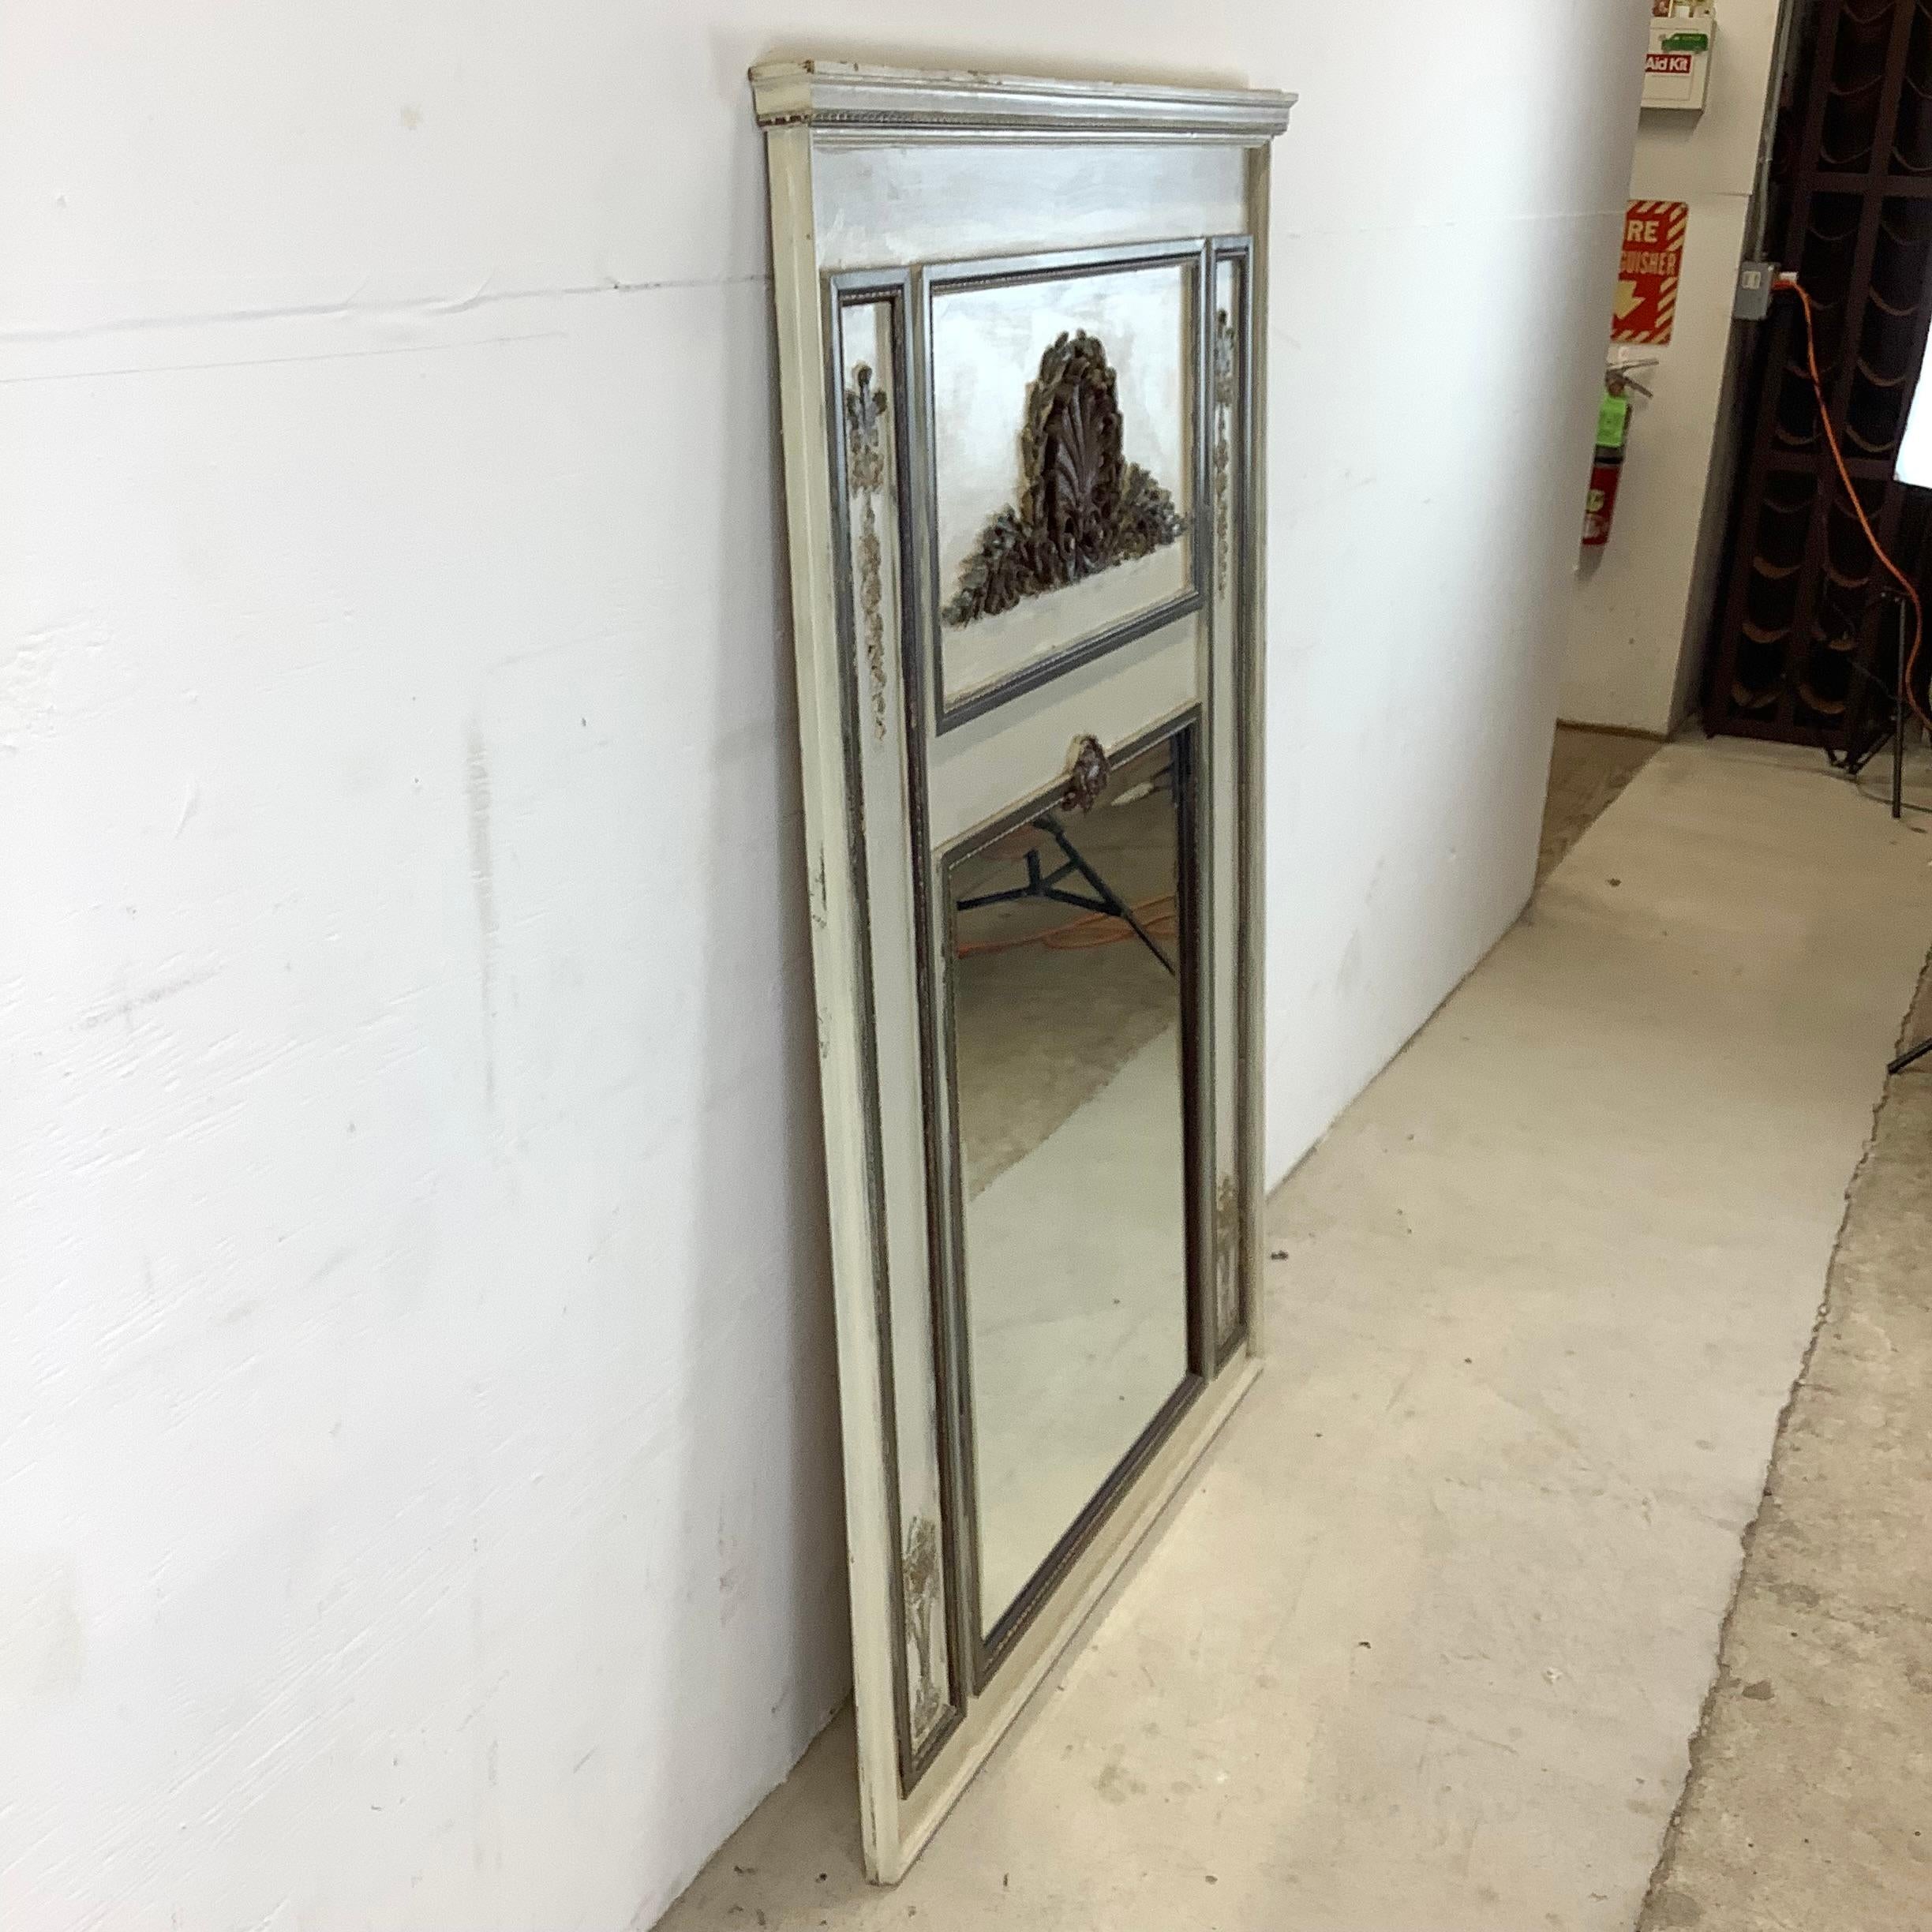 Other Vintage Regency Trumeau Mirror with Ornate Detailing